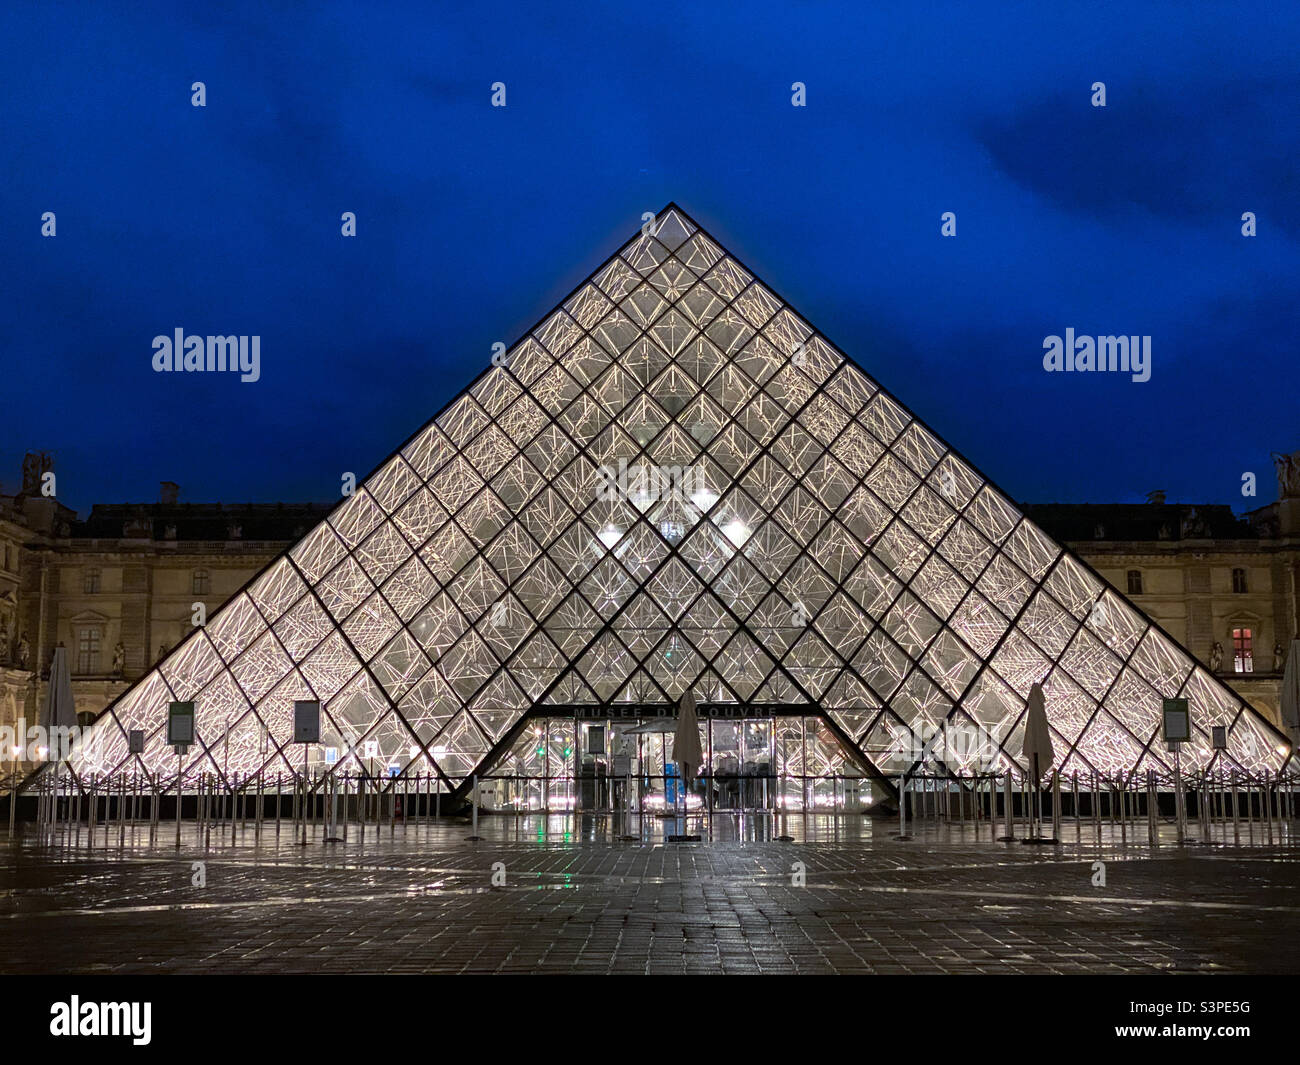 The iconic and controversial Pyramid in the courtyard of the Louvre in Paris, France Stock Photo